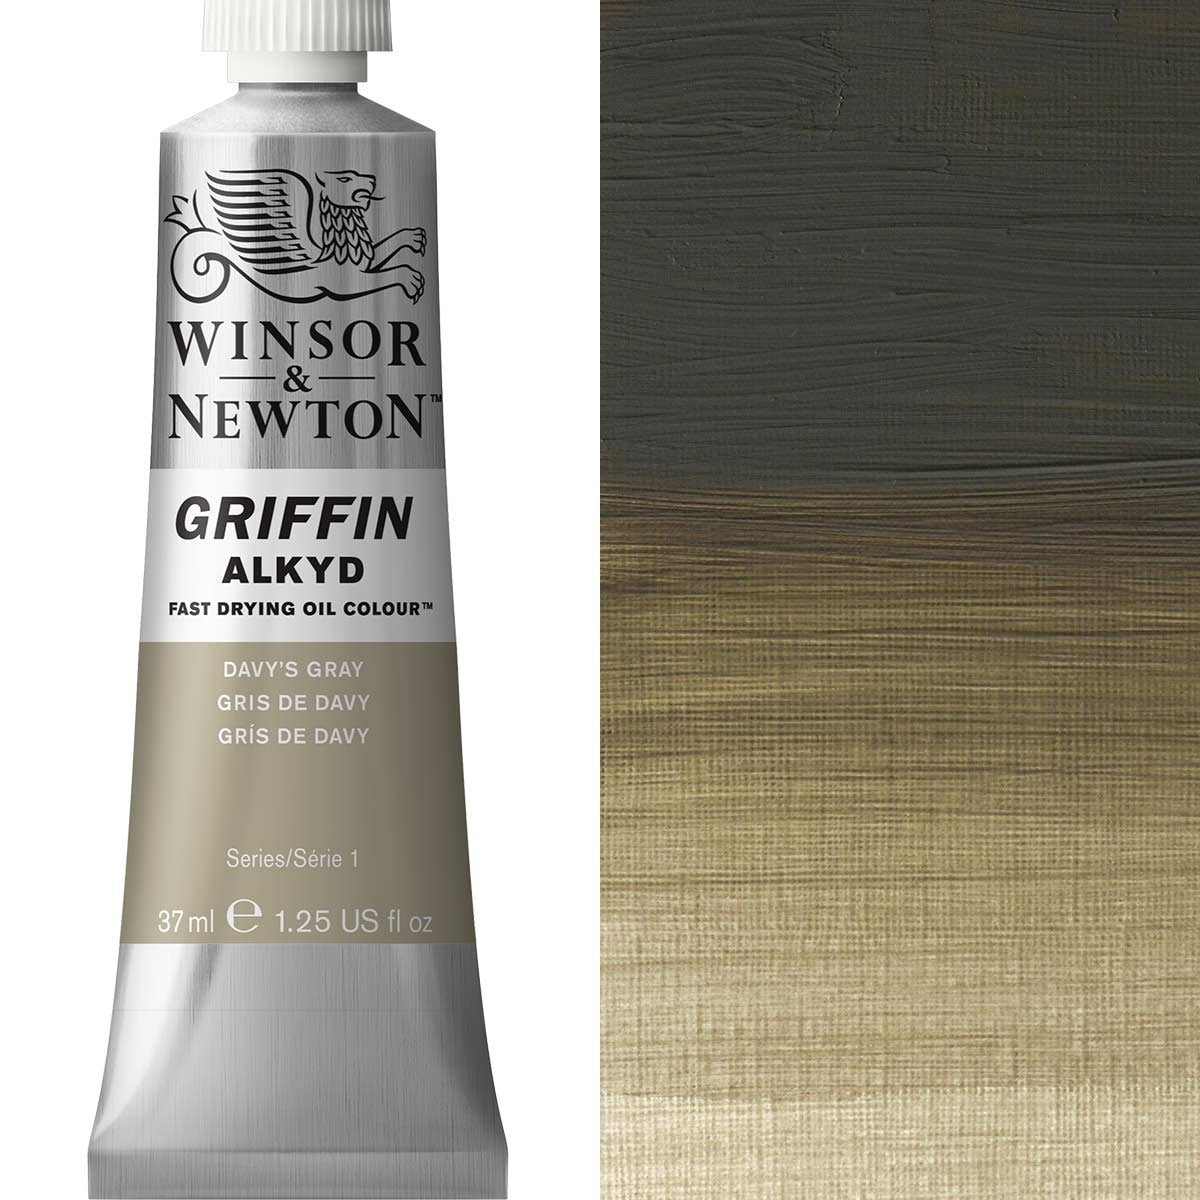 Winsor et Newton - Griffin Alkyd Huile Color - 37ml - Davy's Gray